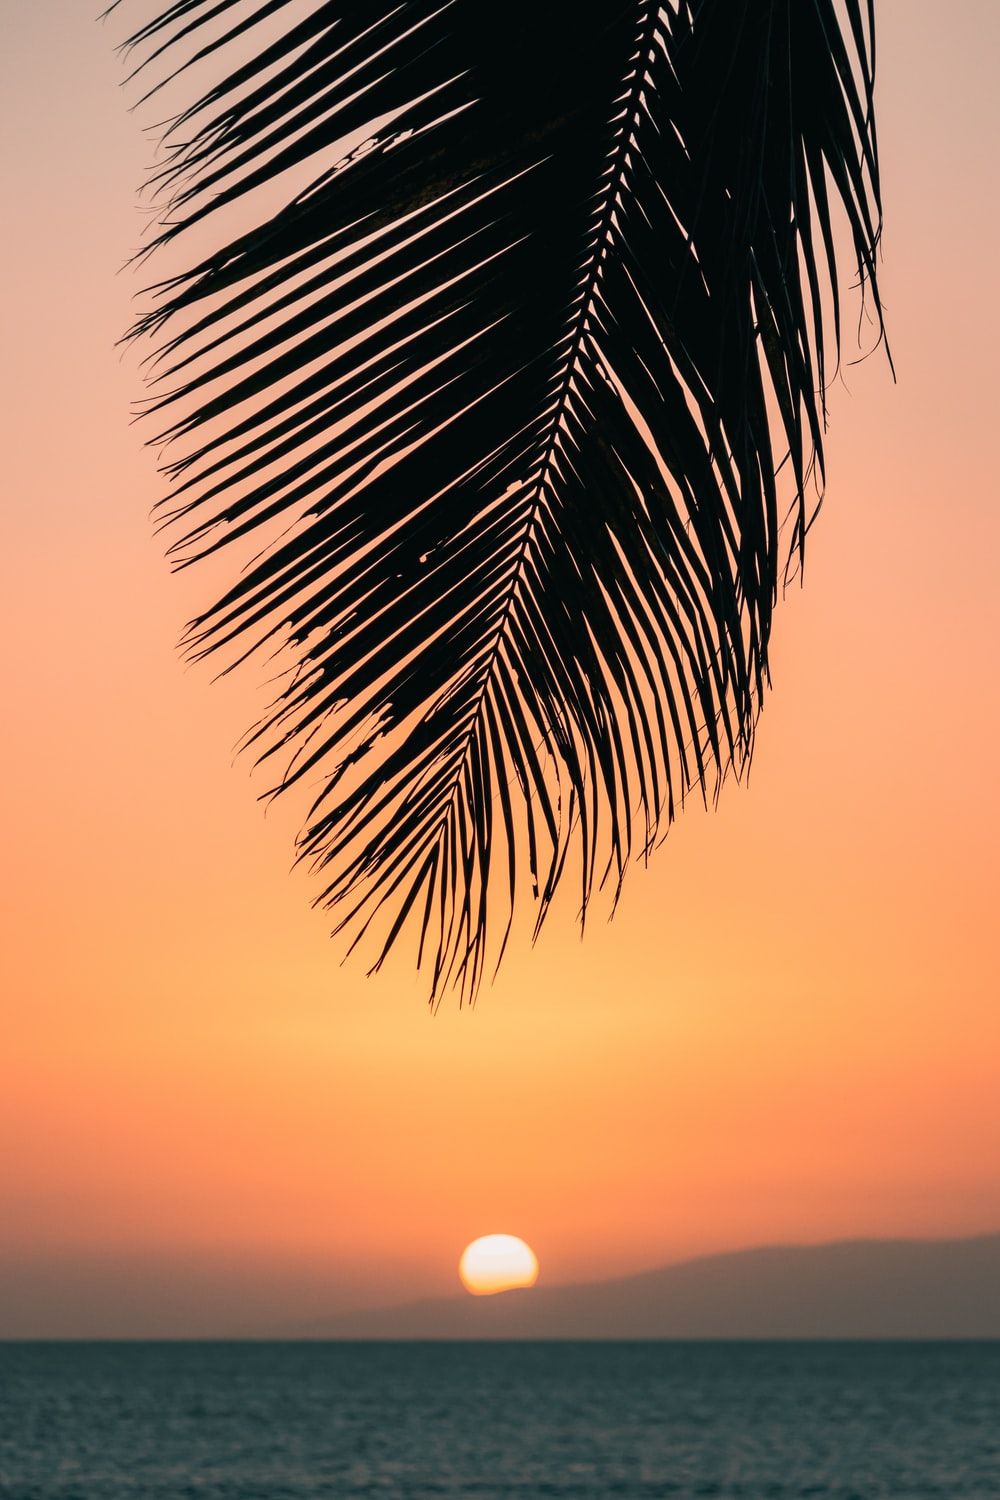 Hawaii Sunset Picture. Download Free Image